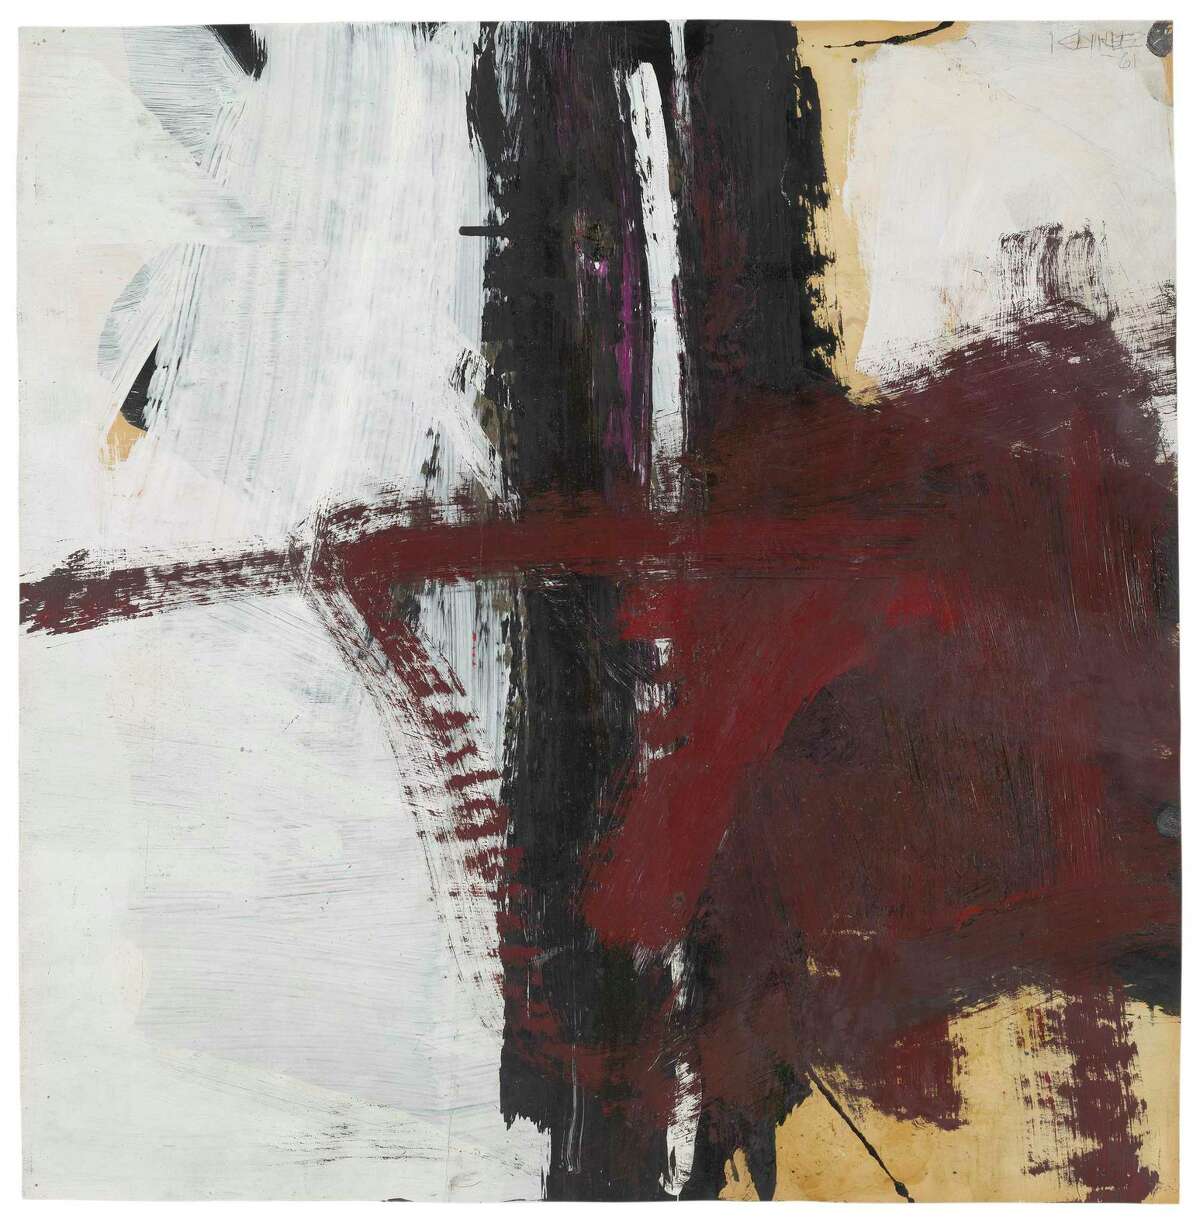 Franz Kline’s “Untitled” from1961 was gifted to the Yale University Art Gallery by the Friday Foundation in honor of Richard E. Lang and Jane Lang Davis.